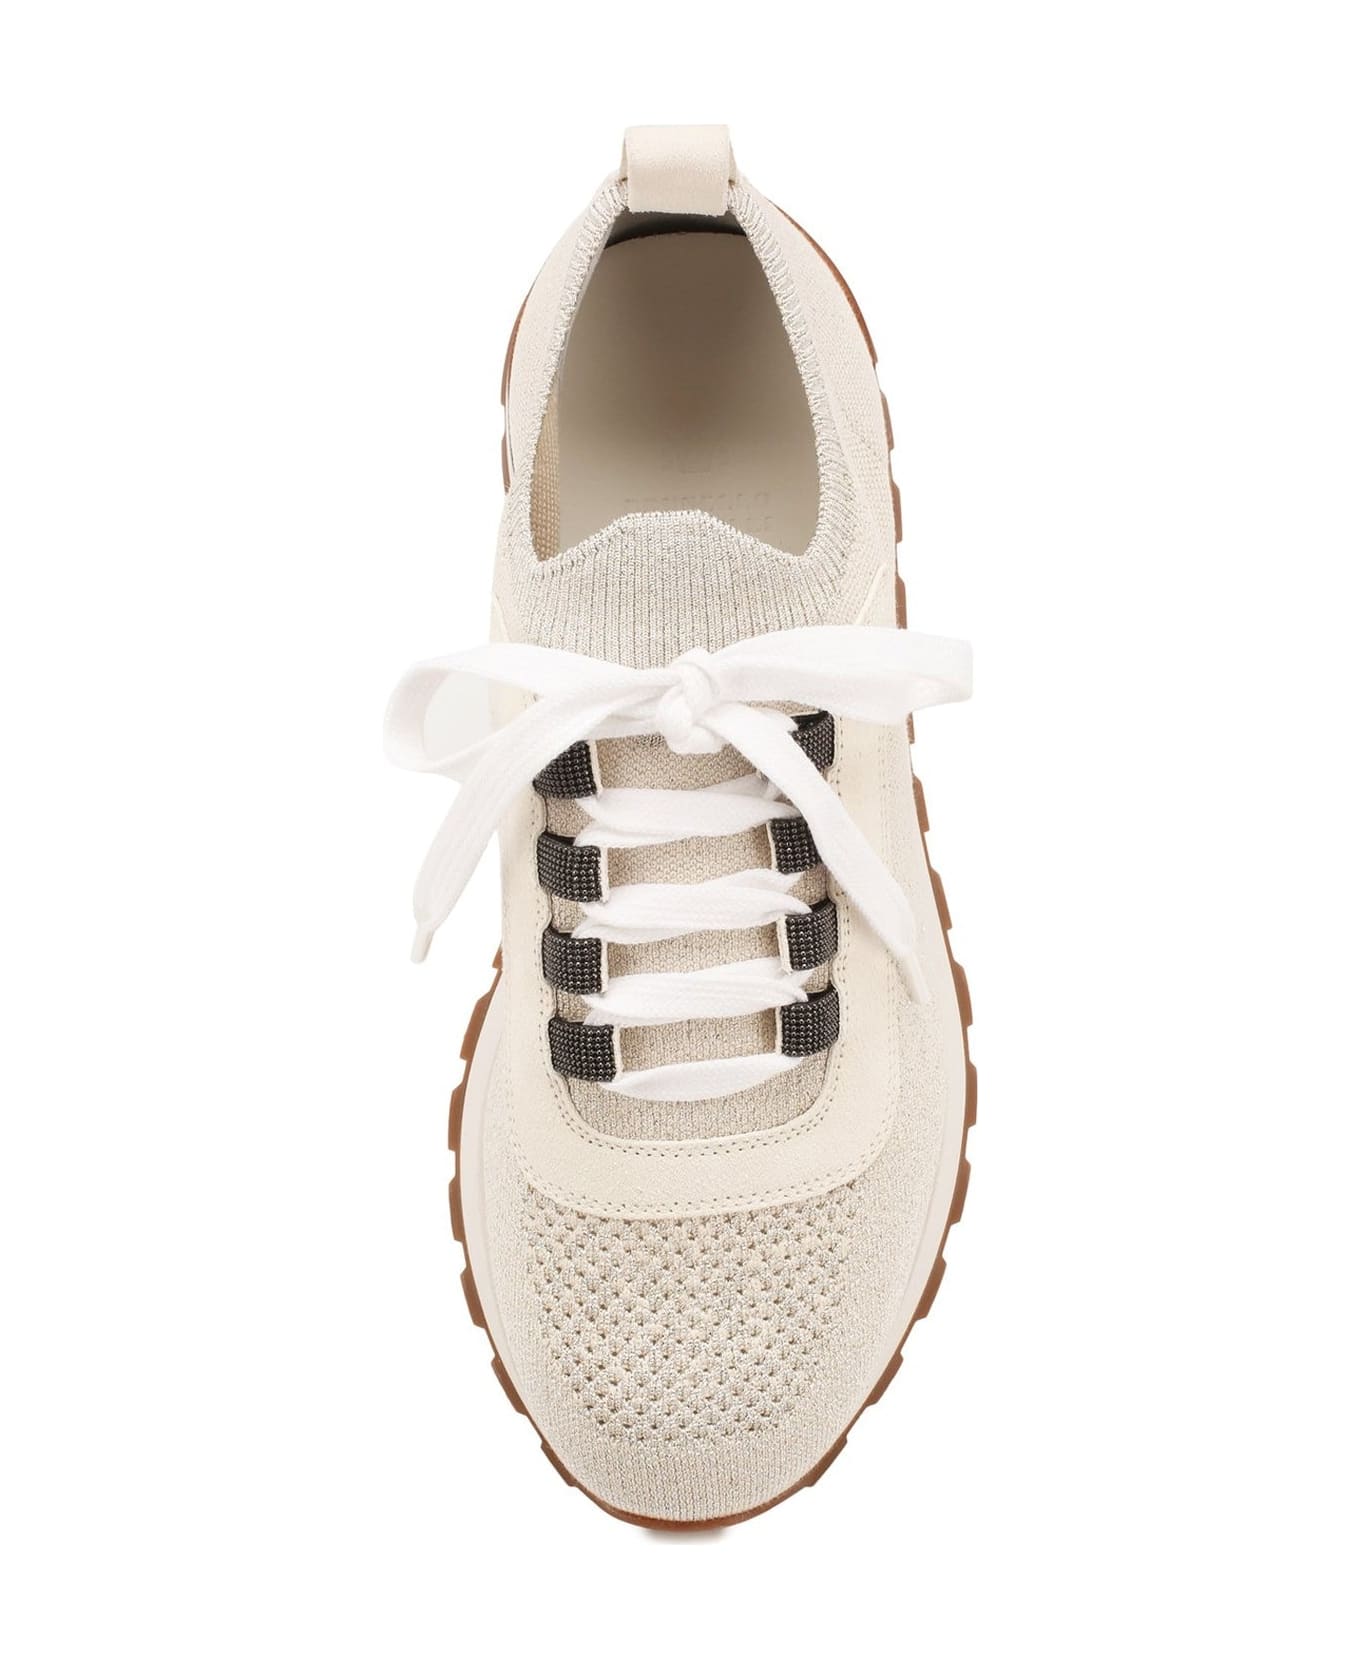 Brunello Cucinelli Lace-up Sneakers - Beige スニーカー